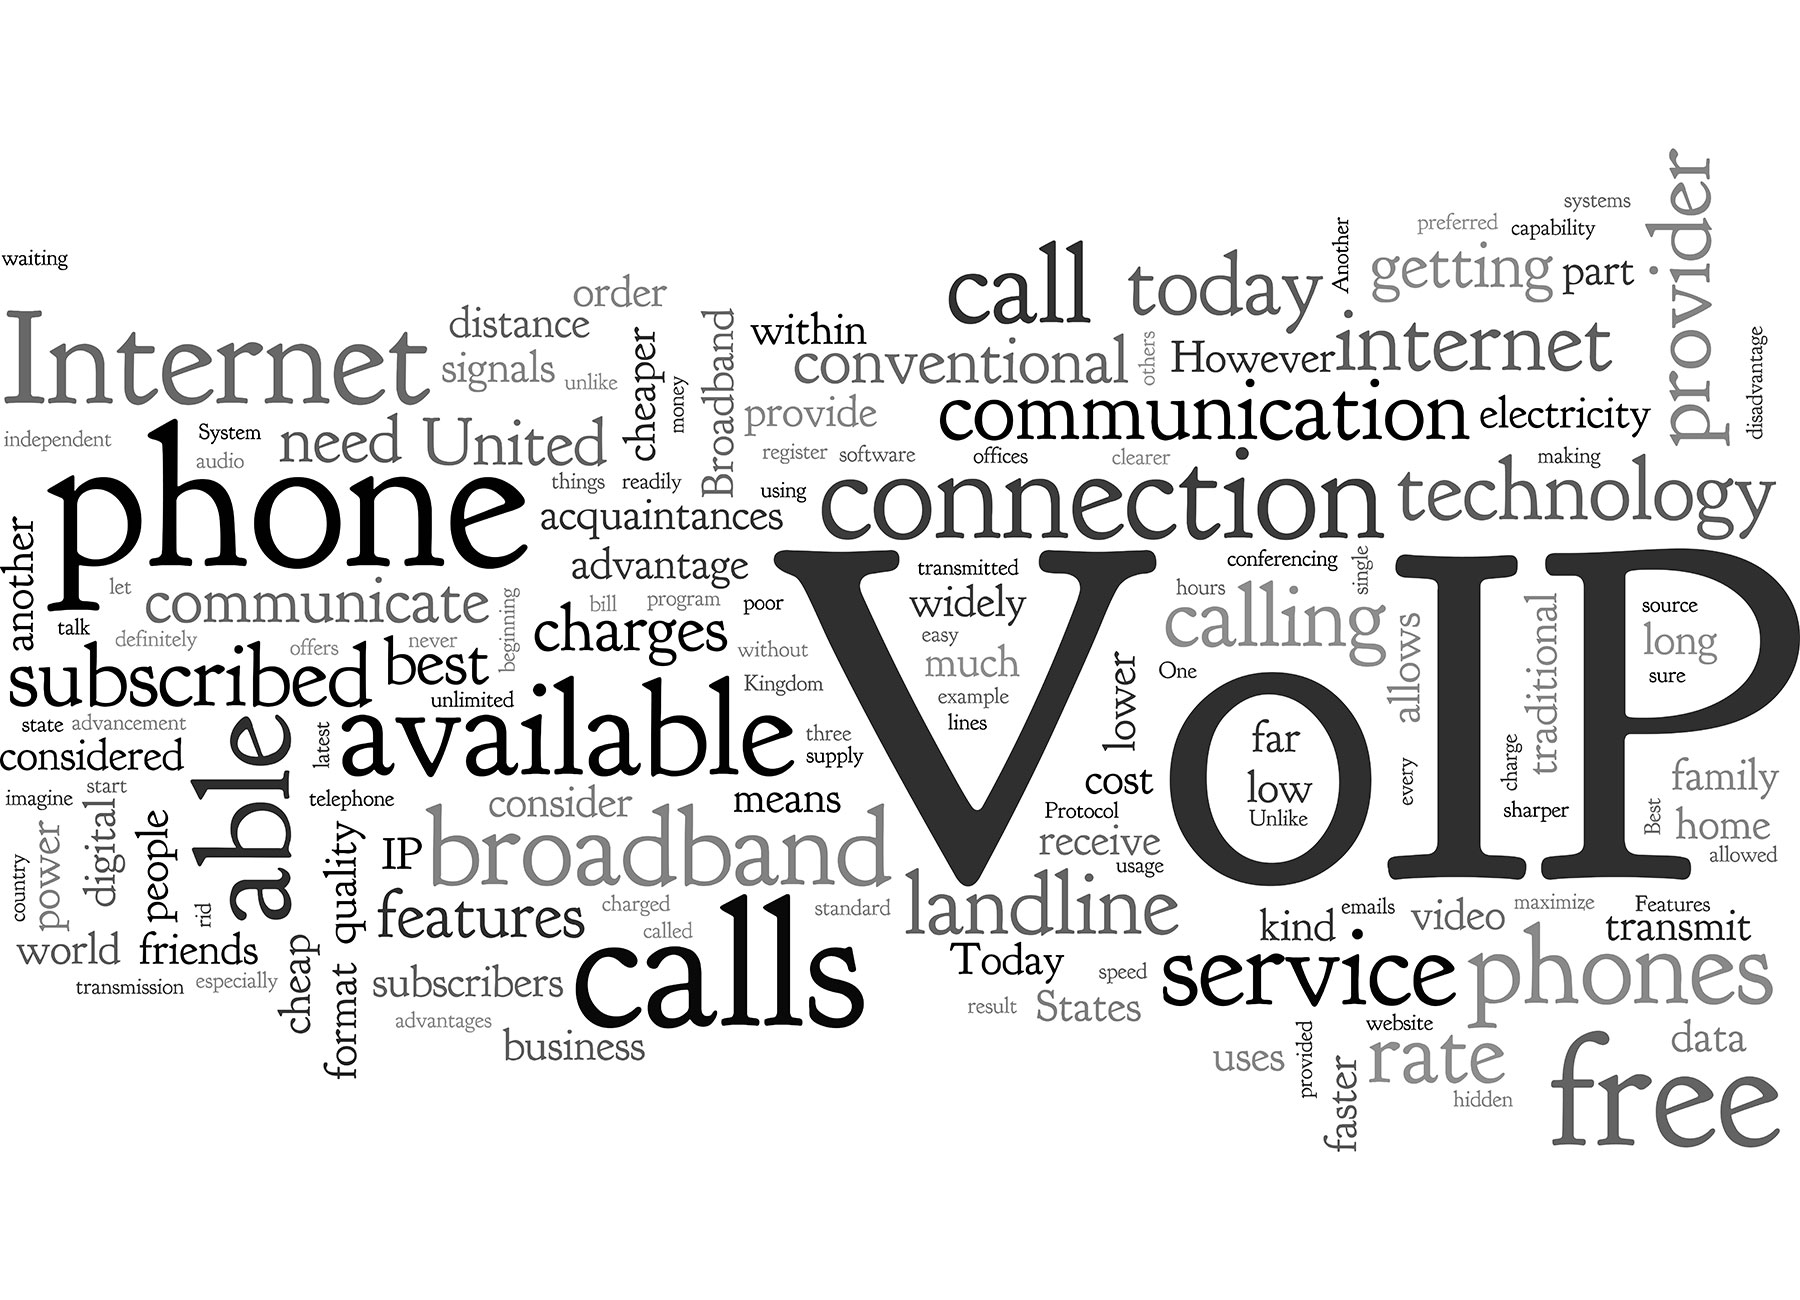 Save time, money, and stress with Interface Technologies’ business VoIP￼